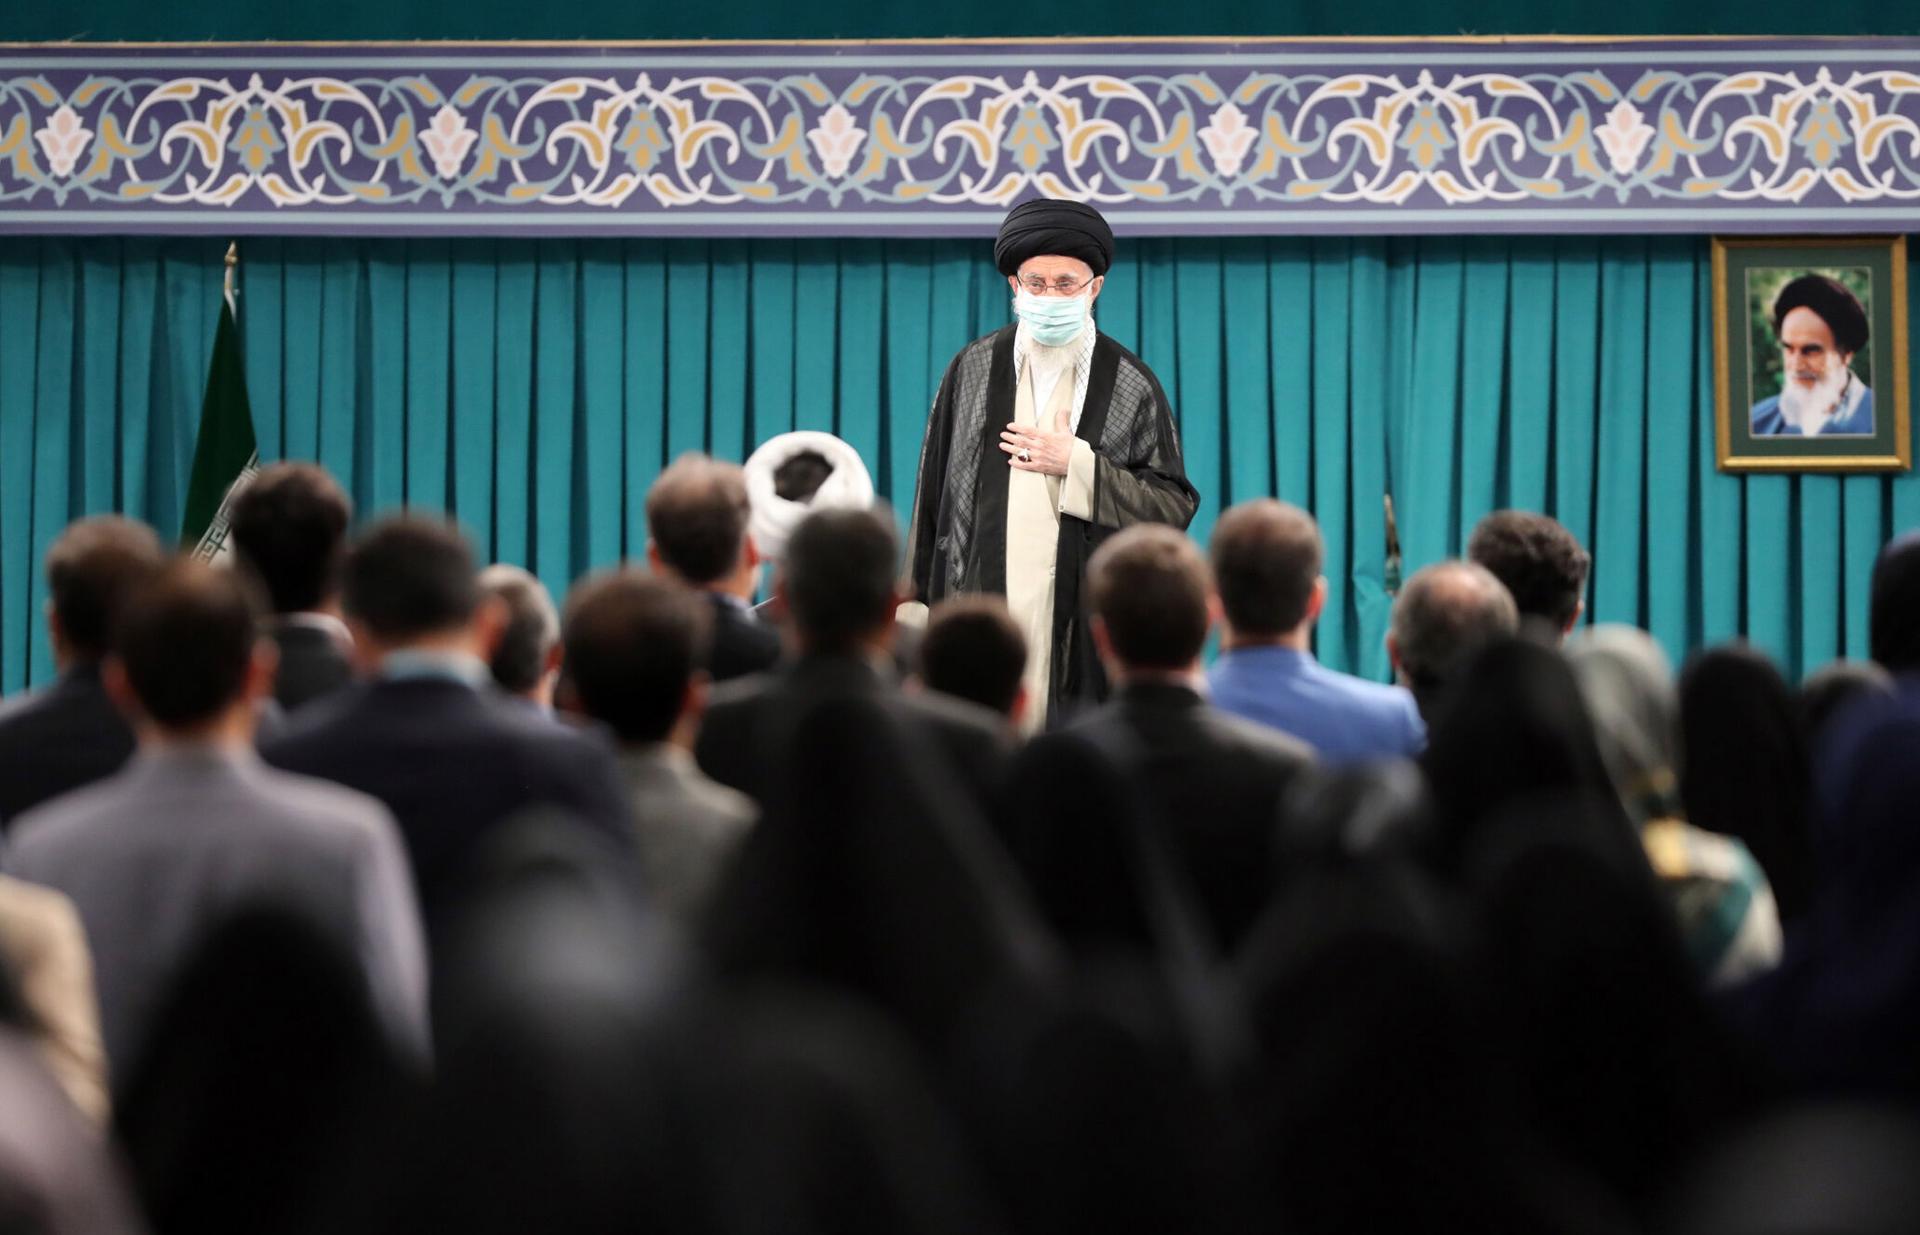 A handout photo made available by the Iranian supreme leader's office shows Iranian supreme leader Ayatollah Ali Khamenei speaking to academic elites in Tehran, Iran, 19 October 2022. EFE-EPA FILE/SUPREME LEADER OFFICE HANDOUT HANDOUT EDITORIAL USE ONLY/NO SALES